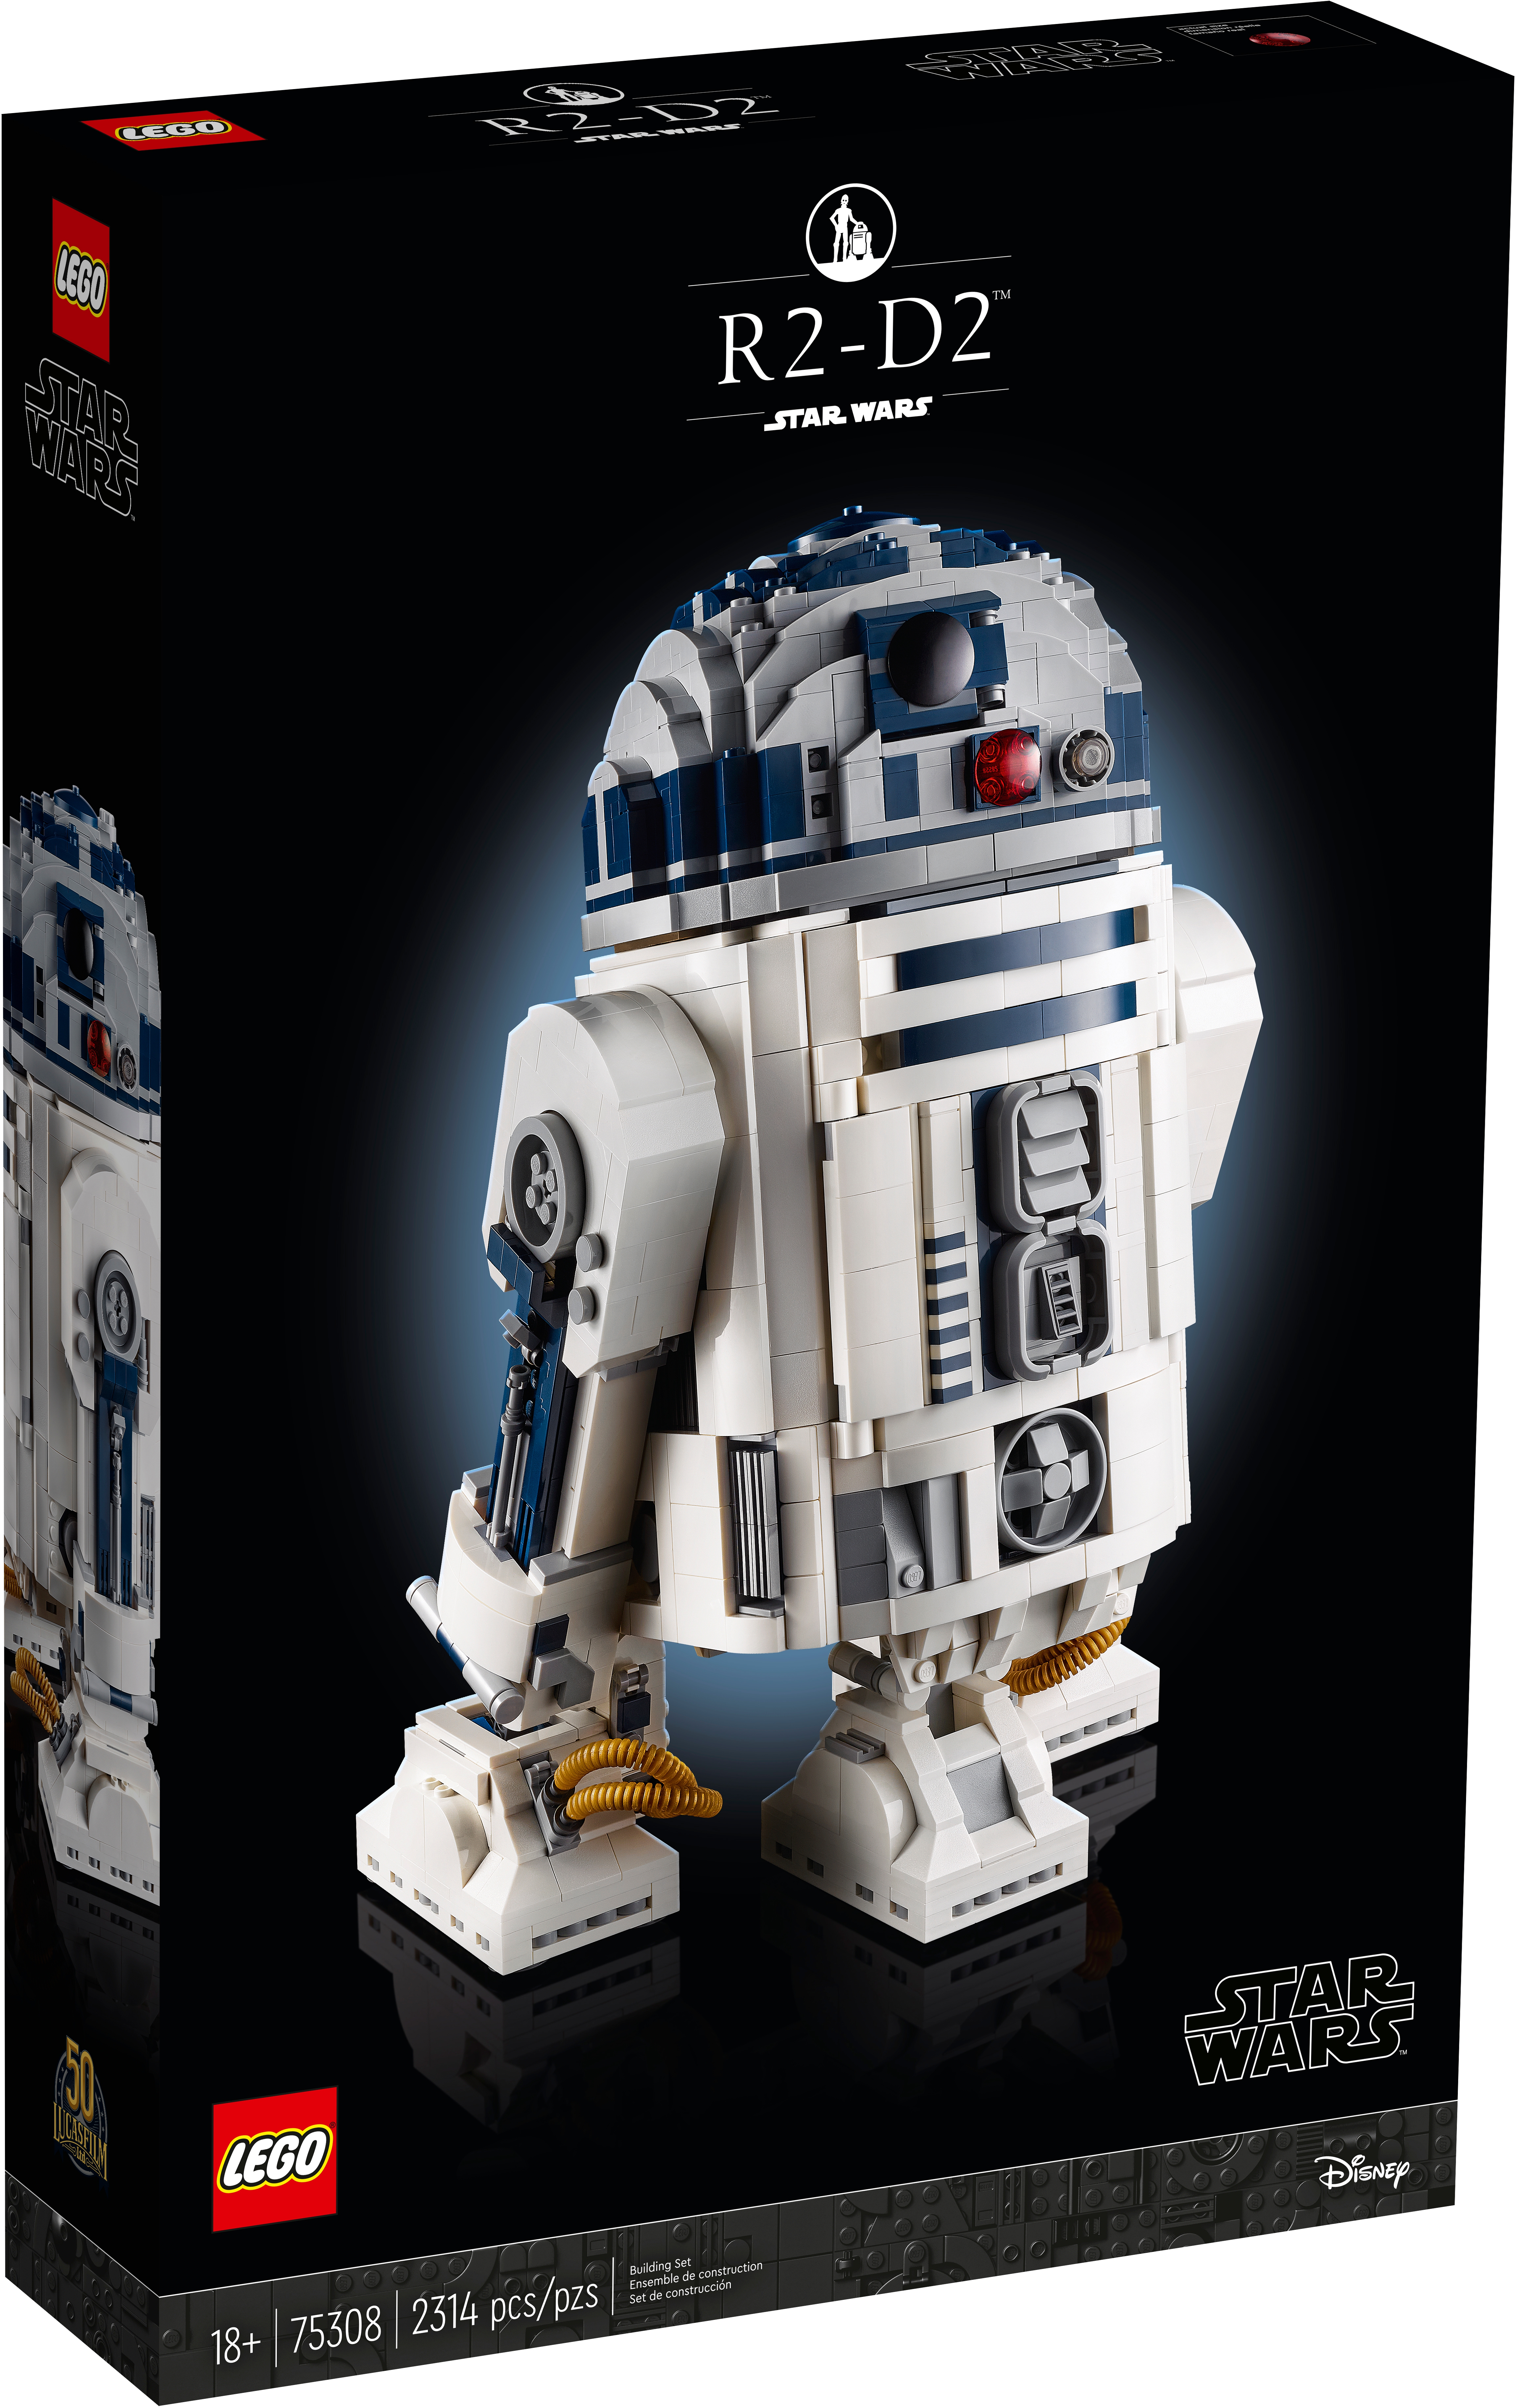 2012 Limited Edition Poster RD-D2 10225 UCS Minifigure R2D2 LEGO Star Wars 